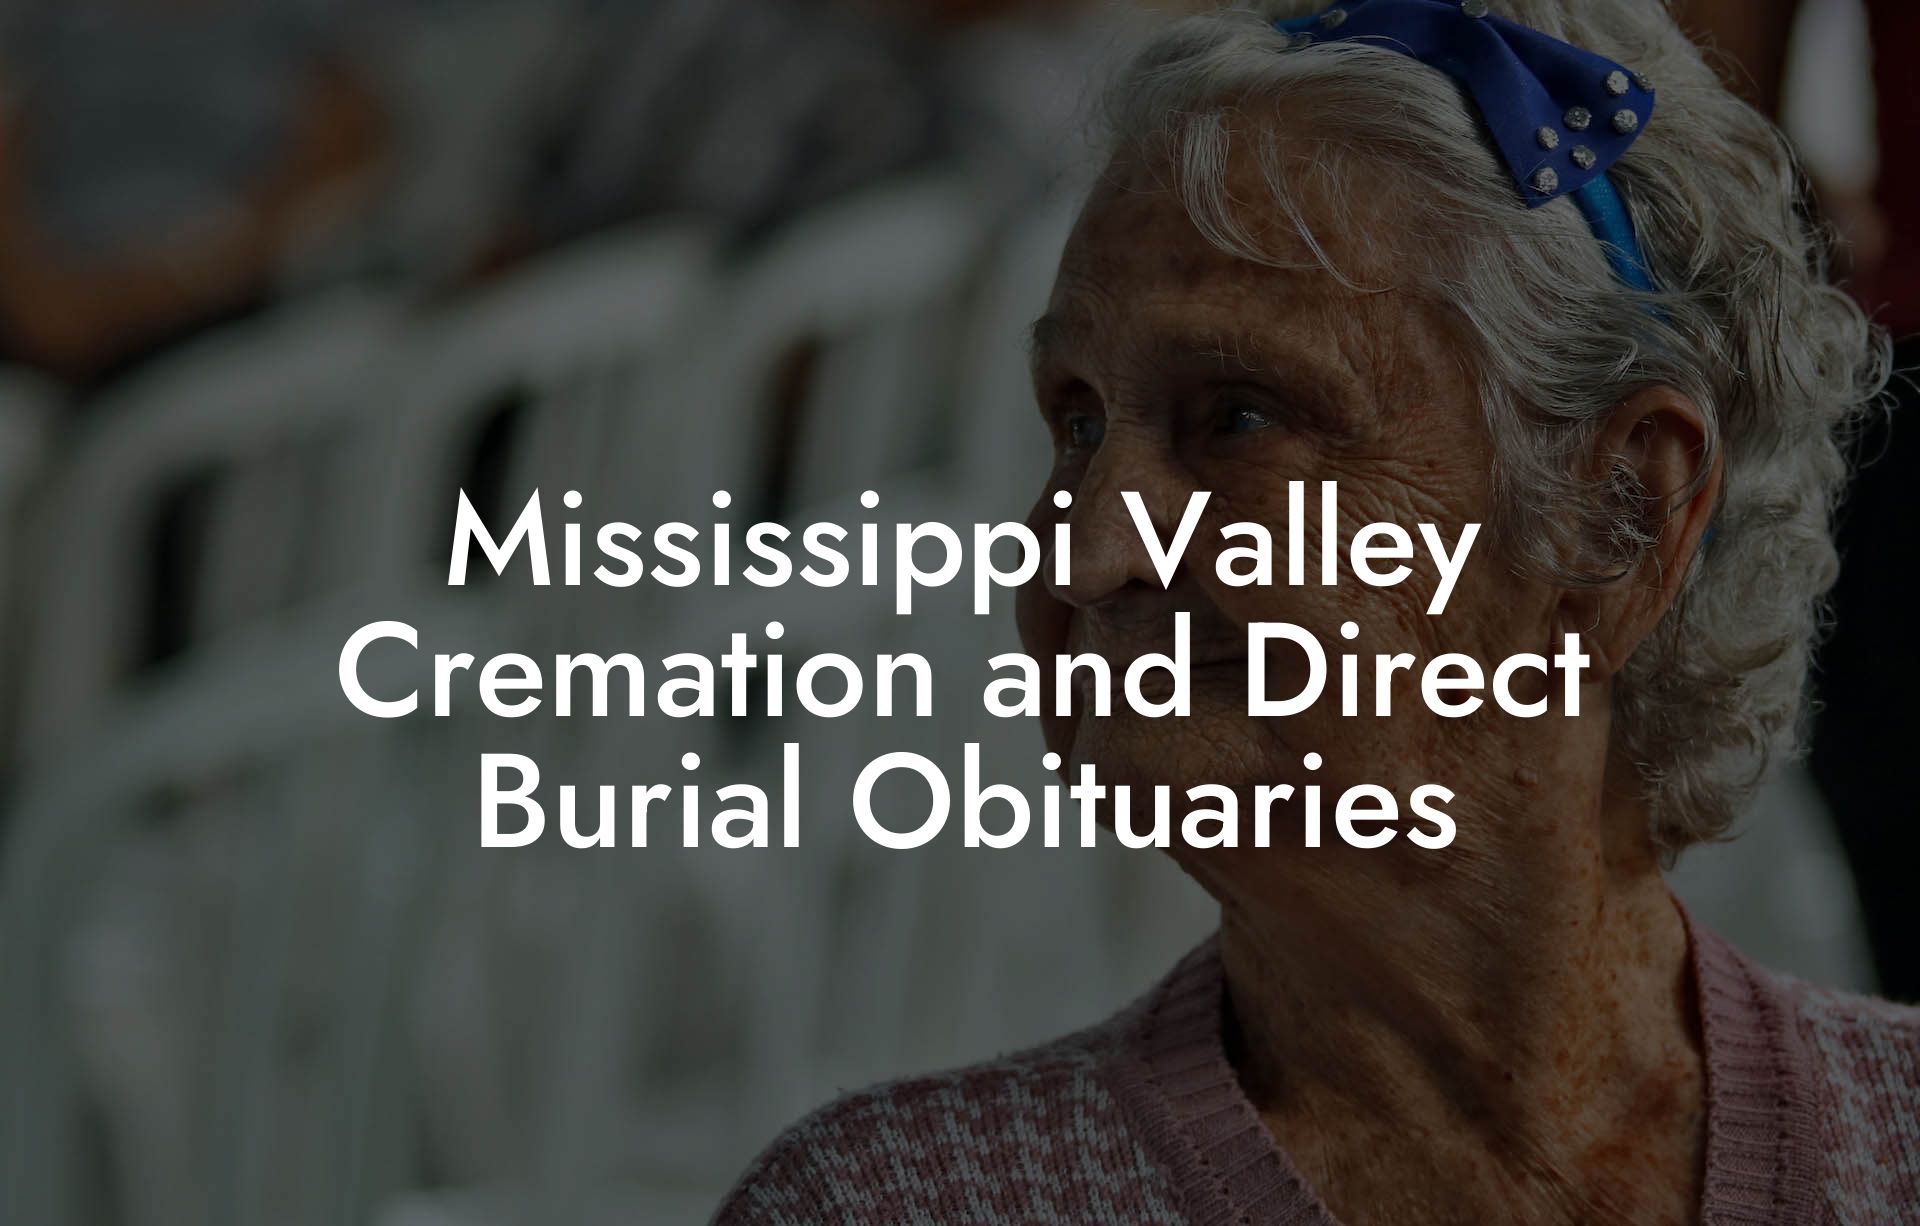 Mississippi Valley Cremation and Direct Burial Obituaries